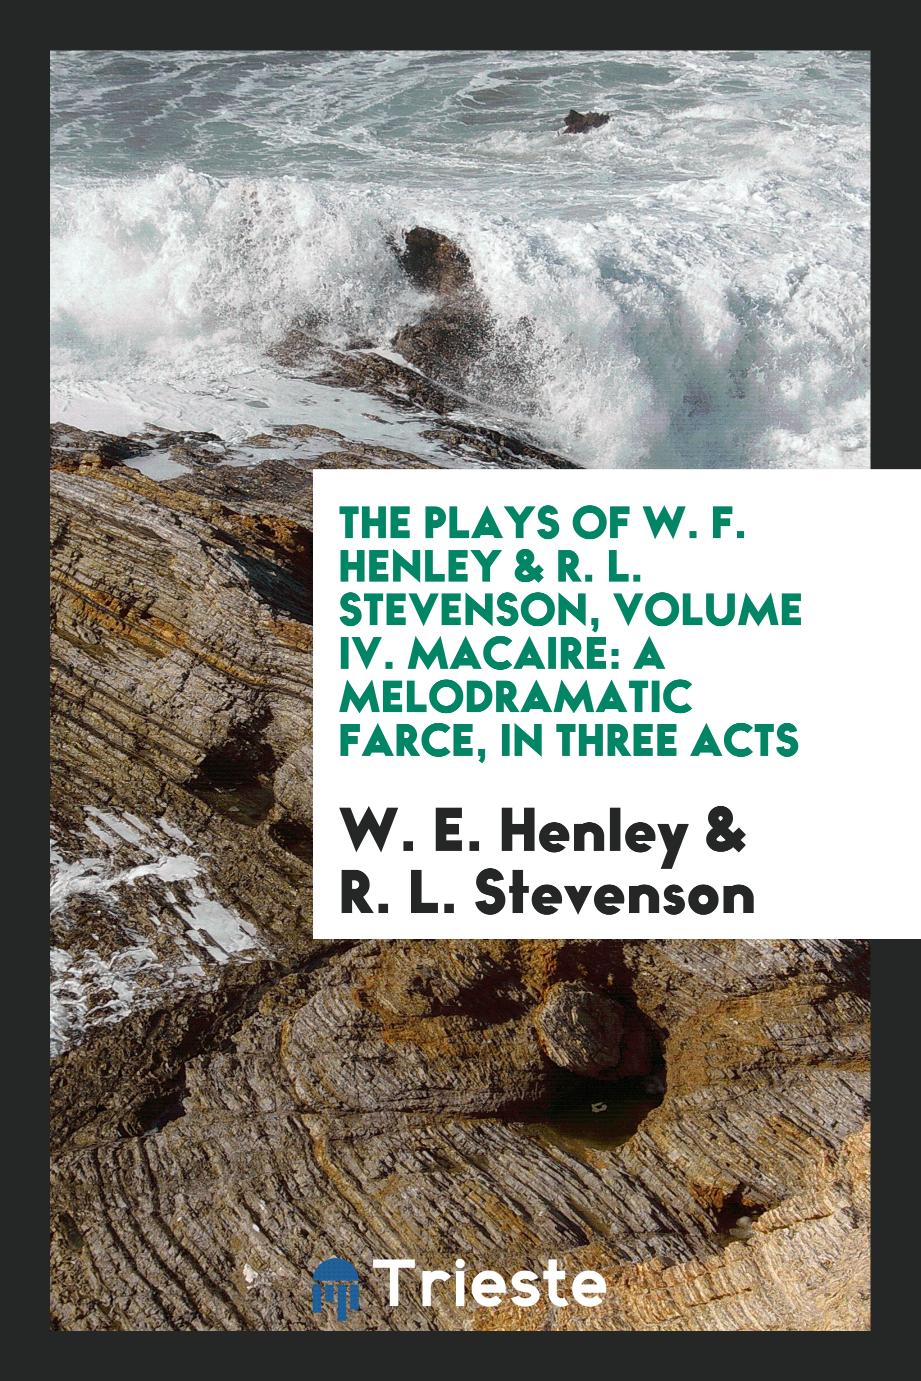 The Plays of W. F. Henley & R. L. Stevenson, Volume IV. Macaire: A Melodramatic Farce, in Three Acts